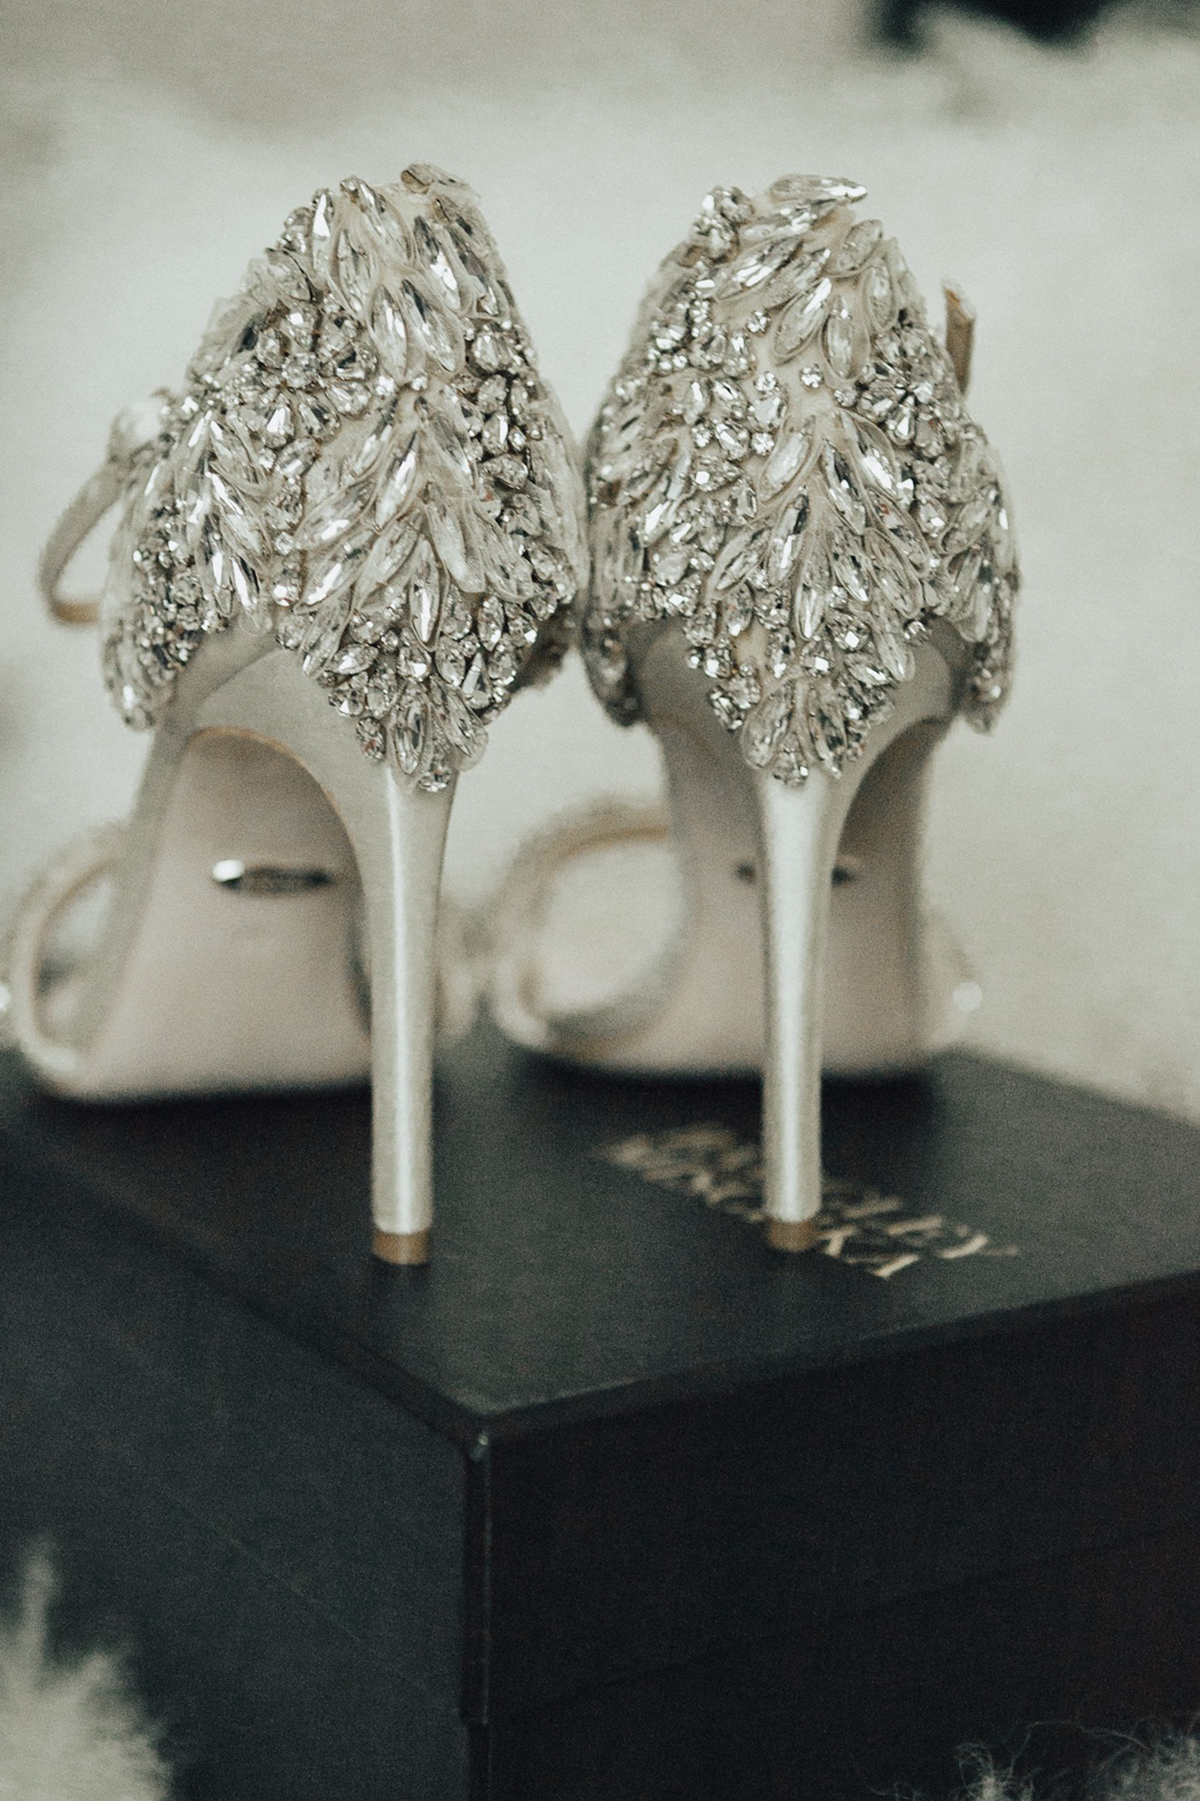 Blogger Sage Coralli of So Sage Blog asks her bridesmaids by giving them a pair of Badgley Mischka Heels